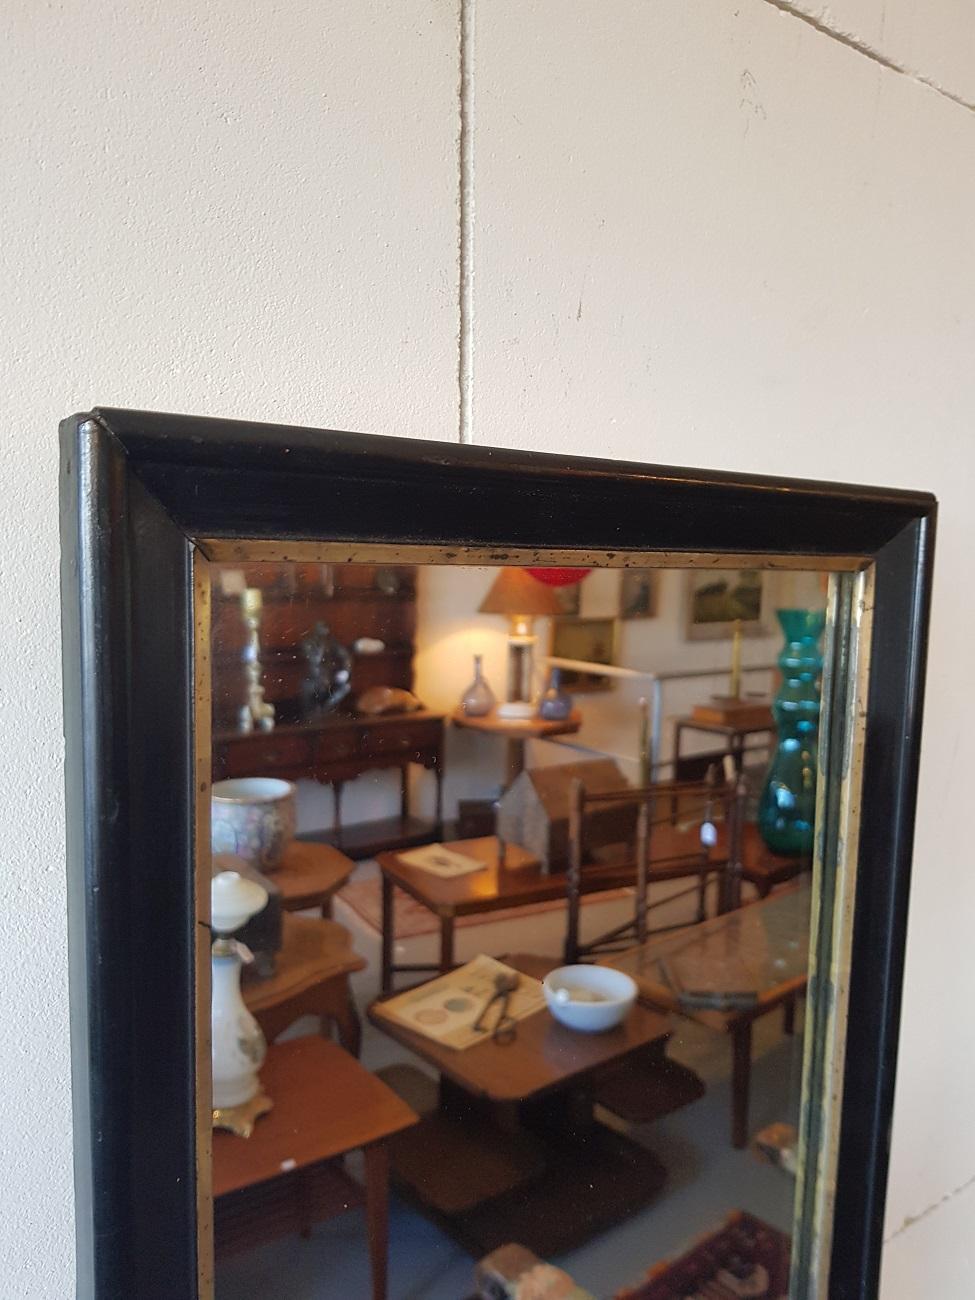 Beautiful antique Dutch mirror with a black lacquered wooden frame and a gold / silver striping, late 19th century.

The measurements are:
Depth 2.5 cm/ 0.9 inch.
Width 32 cm/ 12.5 inch.
Height 67 cm/ 26.3 inch.